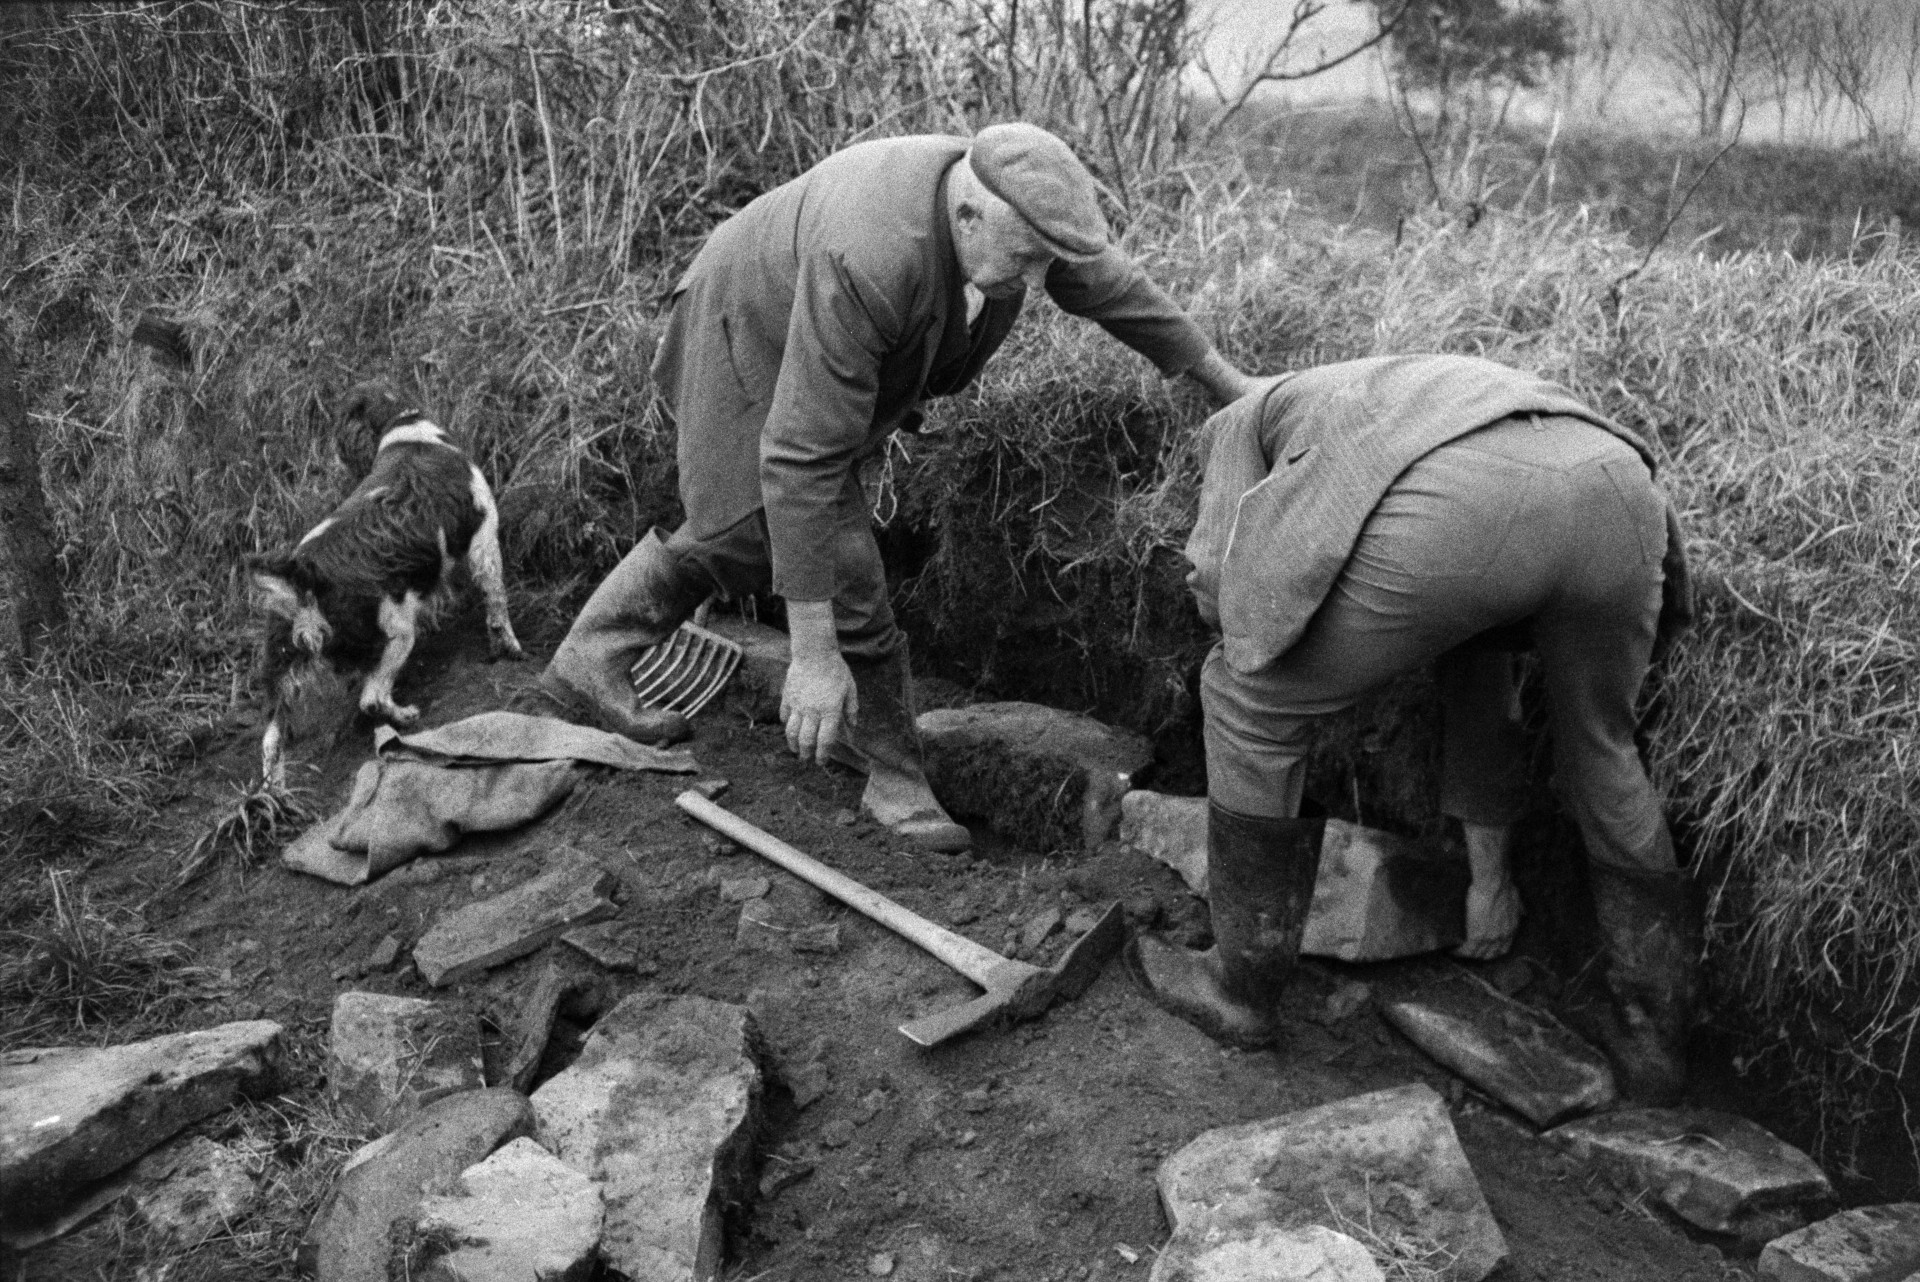 Mr Hooper, on the left, and Ivor Bourne strengthening the hedges in a corner of a field with stone walling, at Mill Road Farm, Beaford. An axe, fork and dog are nearby. The farm was also known as Jeffrys.